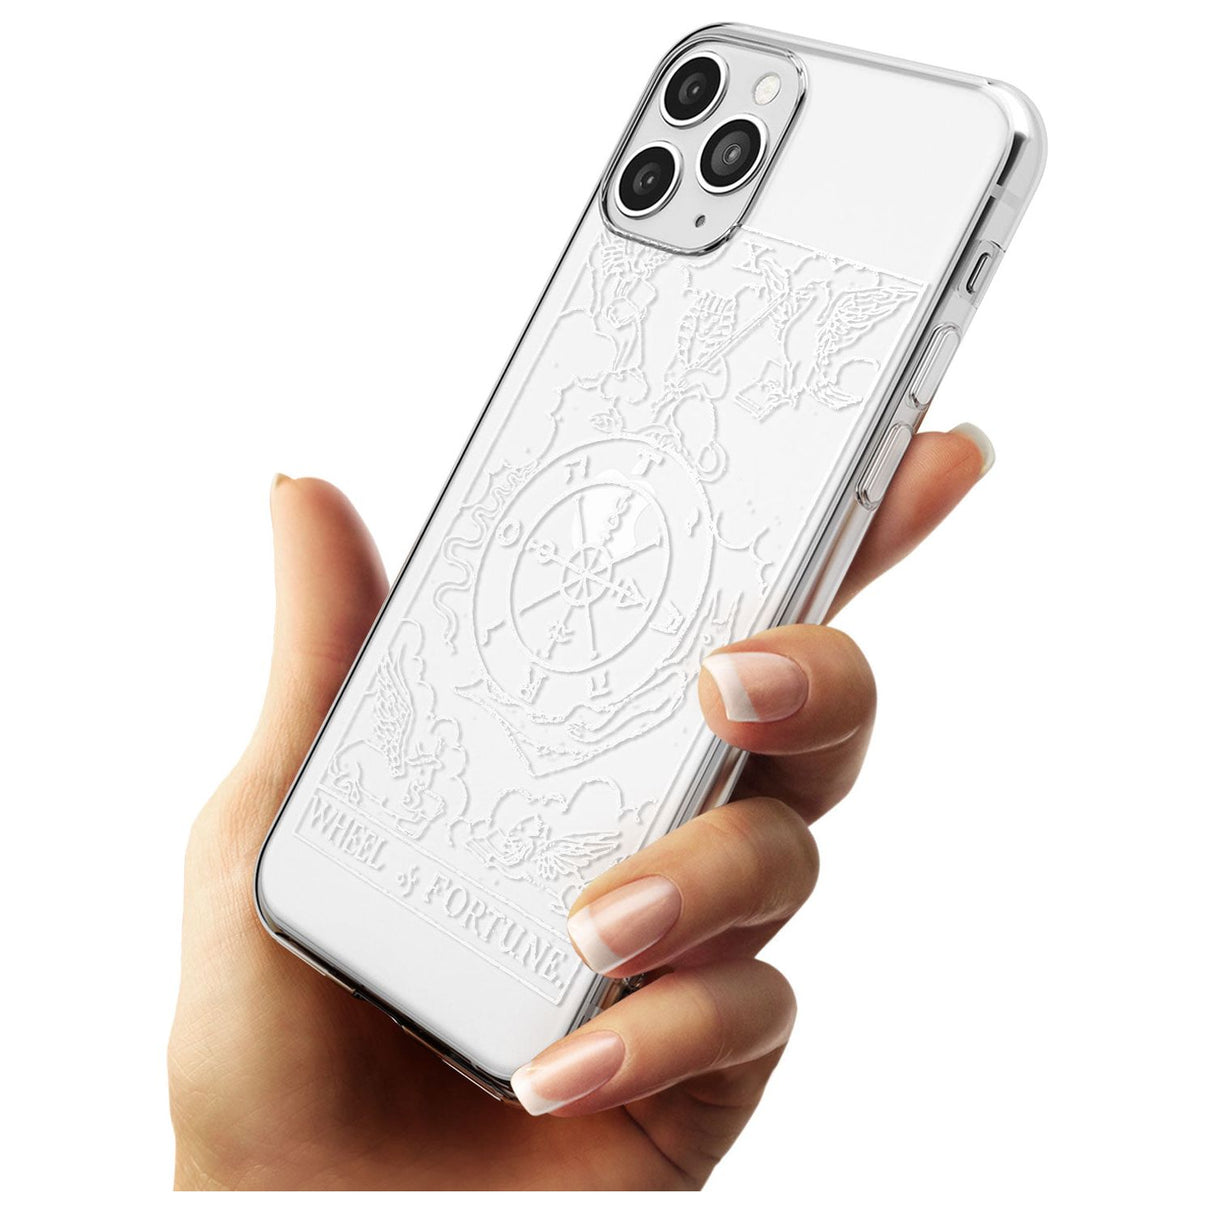 Wheel of Fortune Tarot Card - White Transparent Black Impact Phone Case for iPhone 11 Pro Max